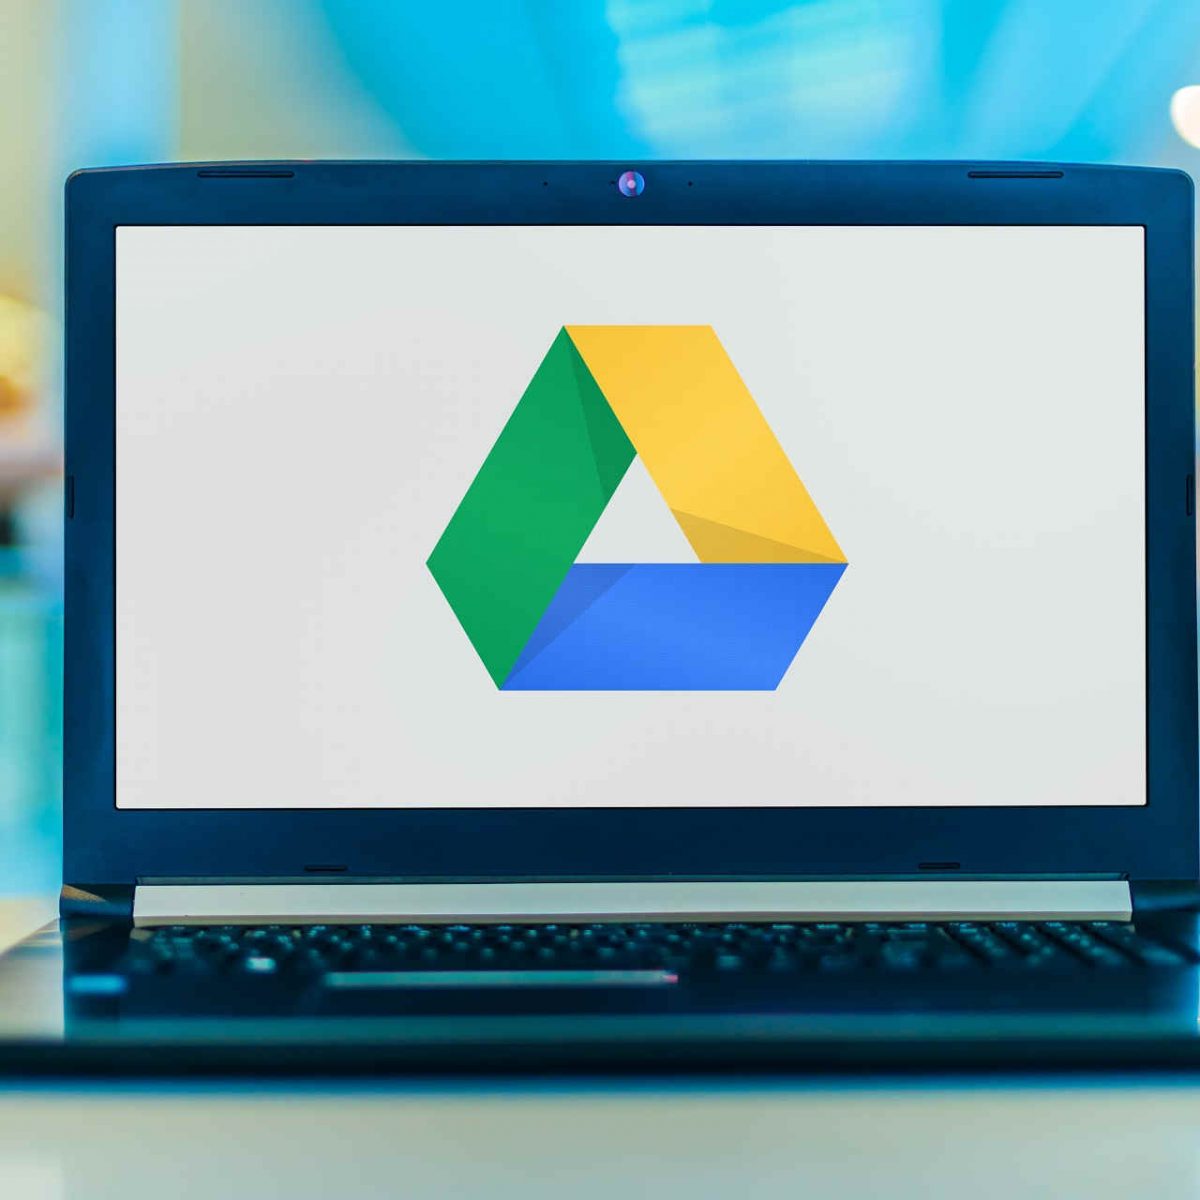 Google Drive Scan File for Viruses: How to Fix